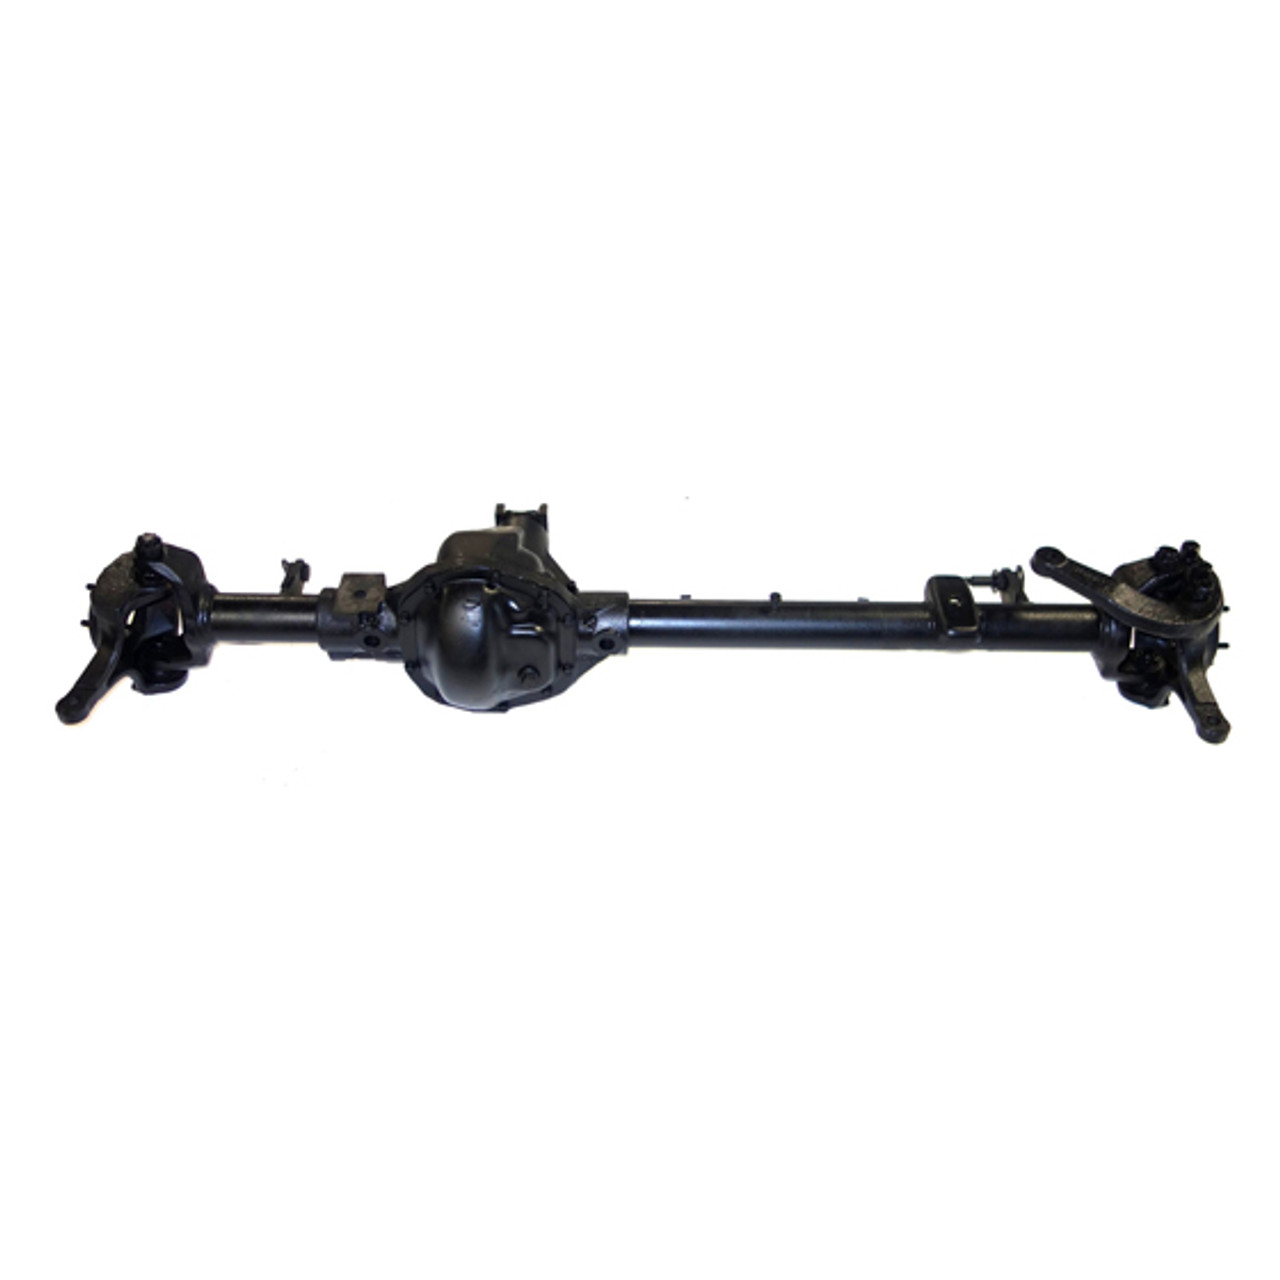 Reman Complete Axle Assembly for Dana 44 Front 1999 Dodge Ram 1500 3.90 Ratio with 4 Wheel ABS